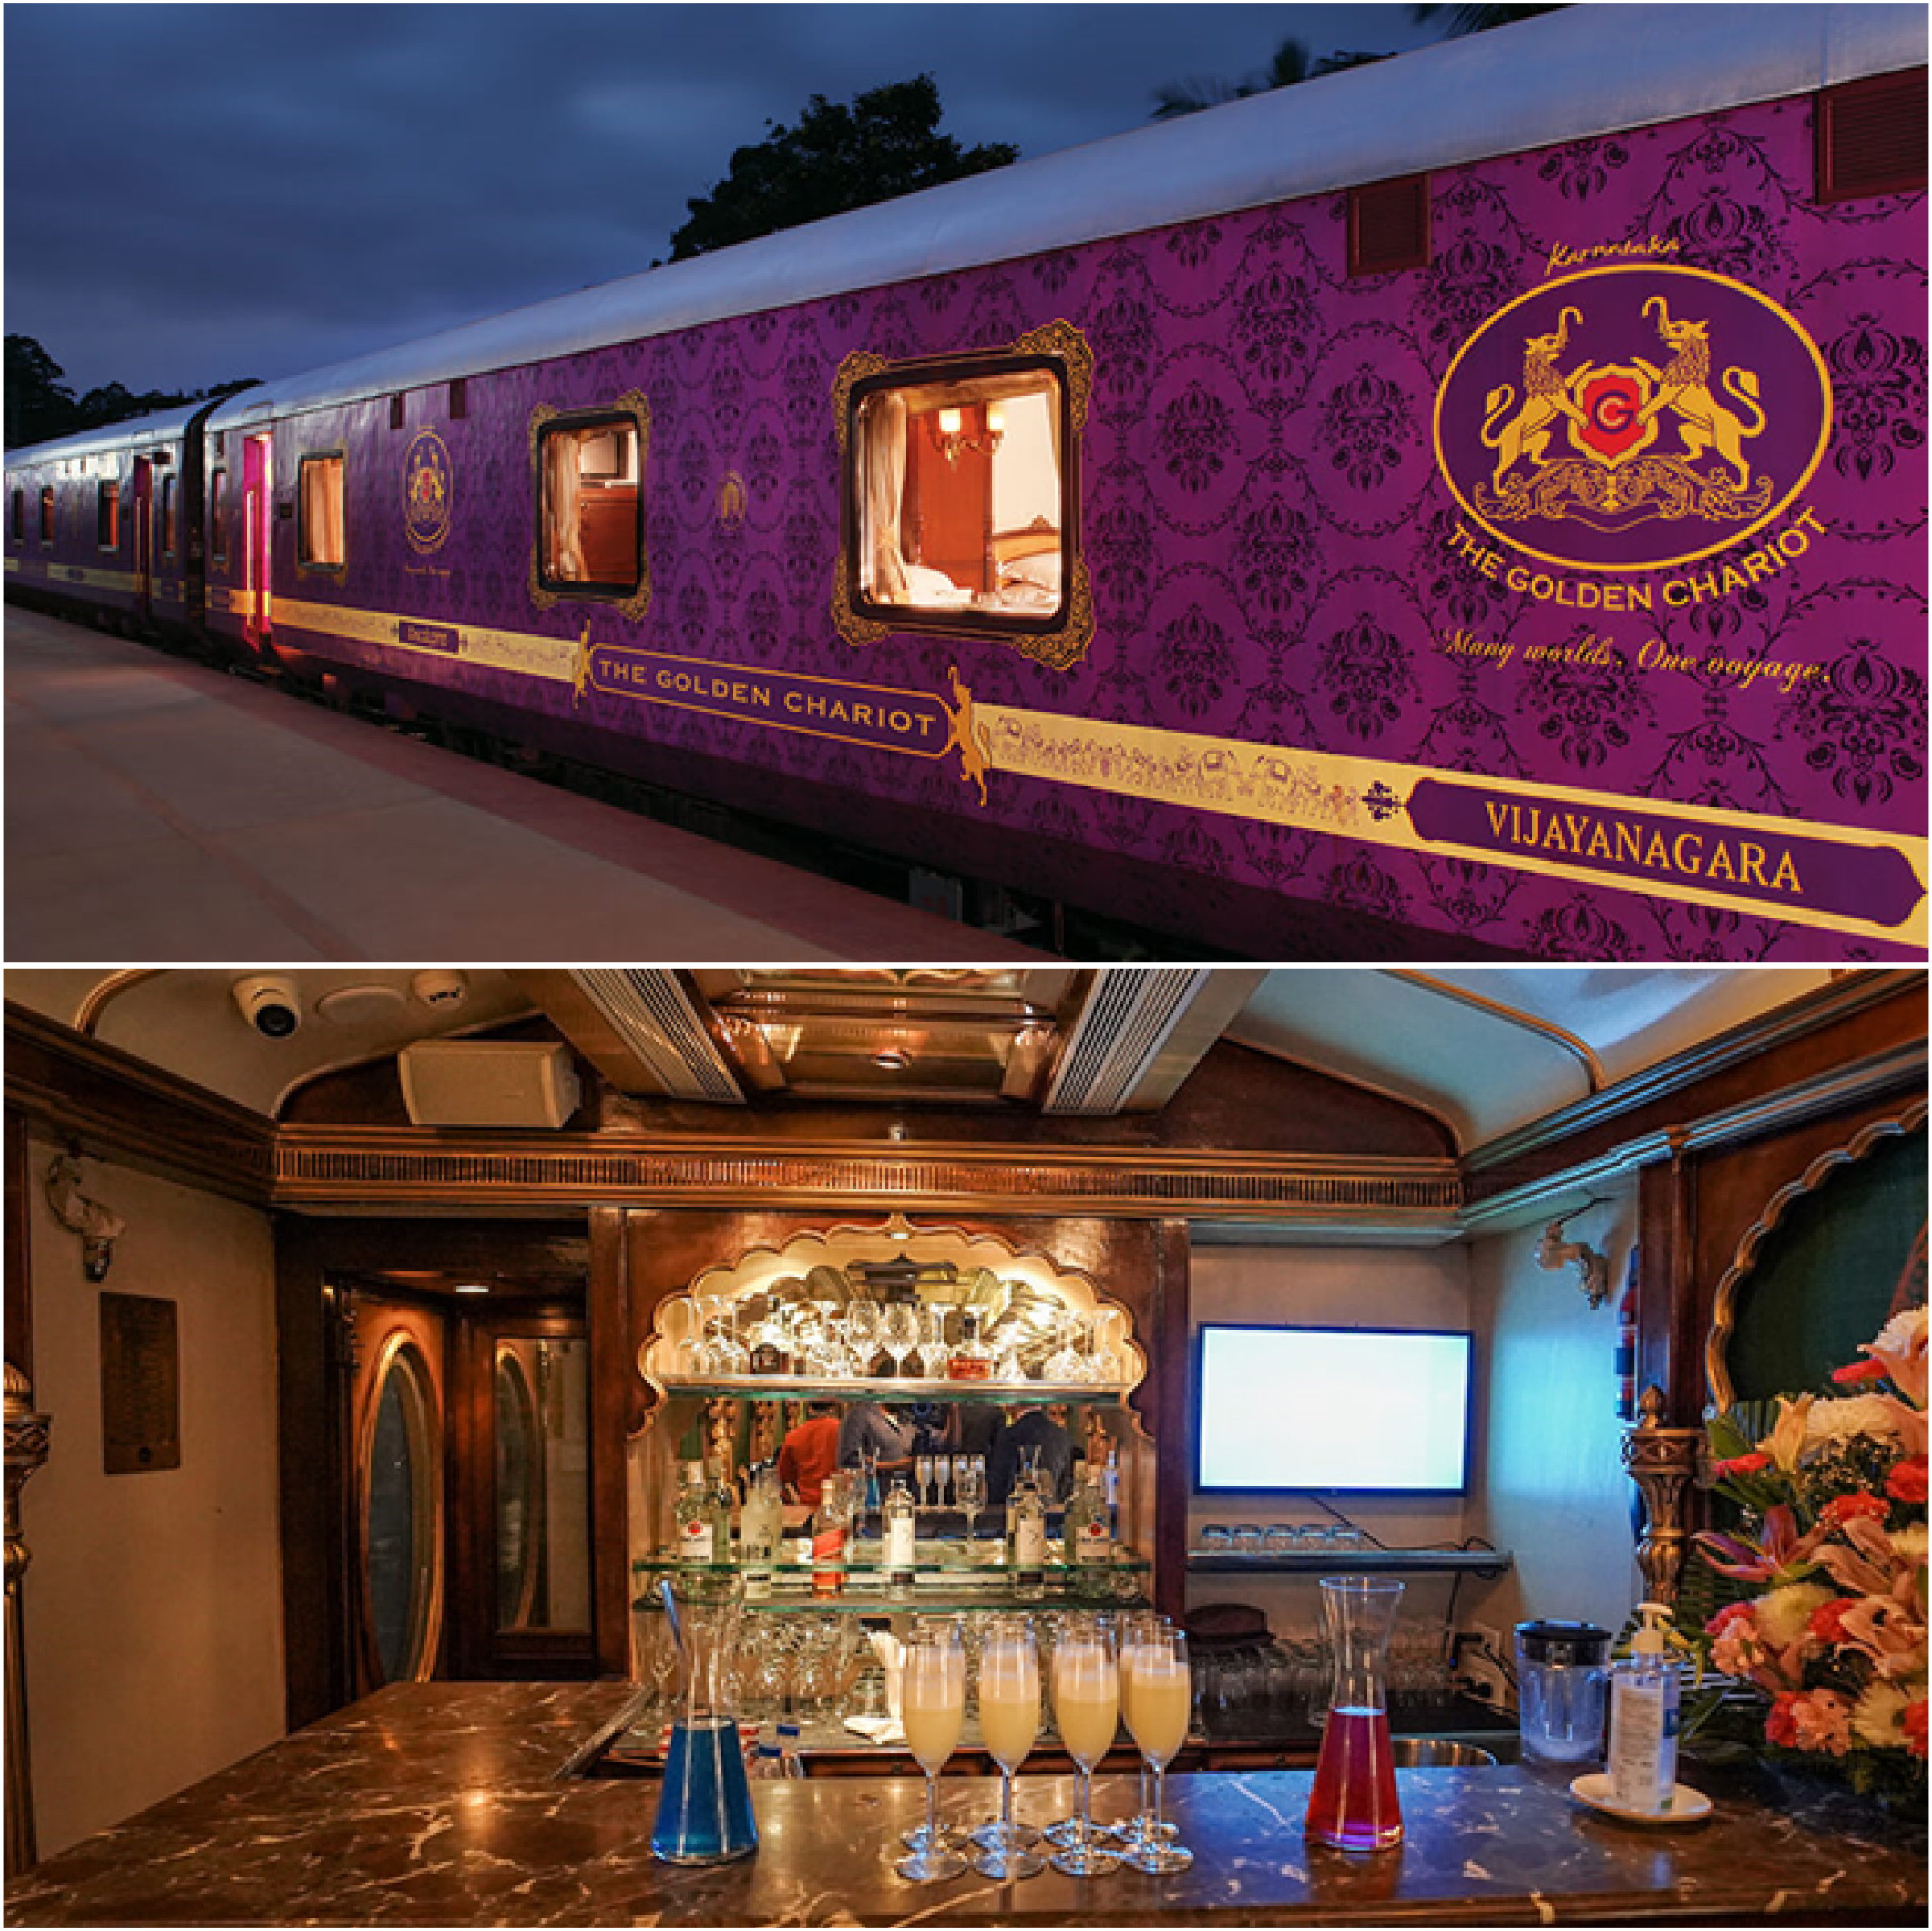 Golden Chariot Luxury Train - Pictures, Price, Itinerary & Other Details